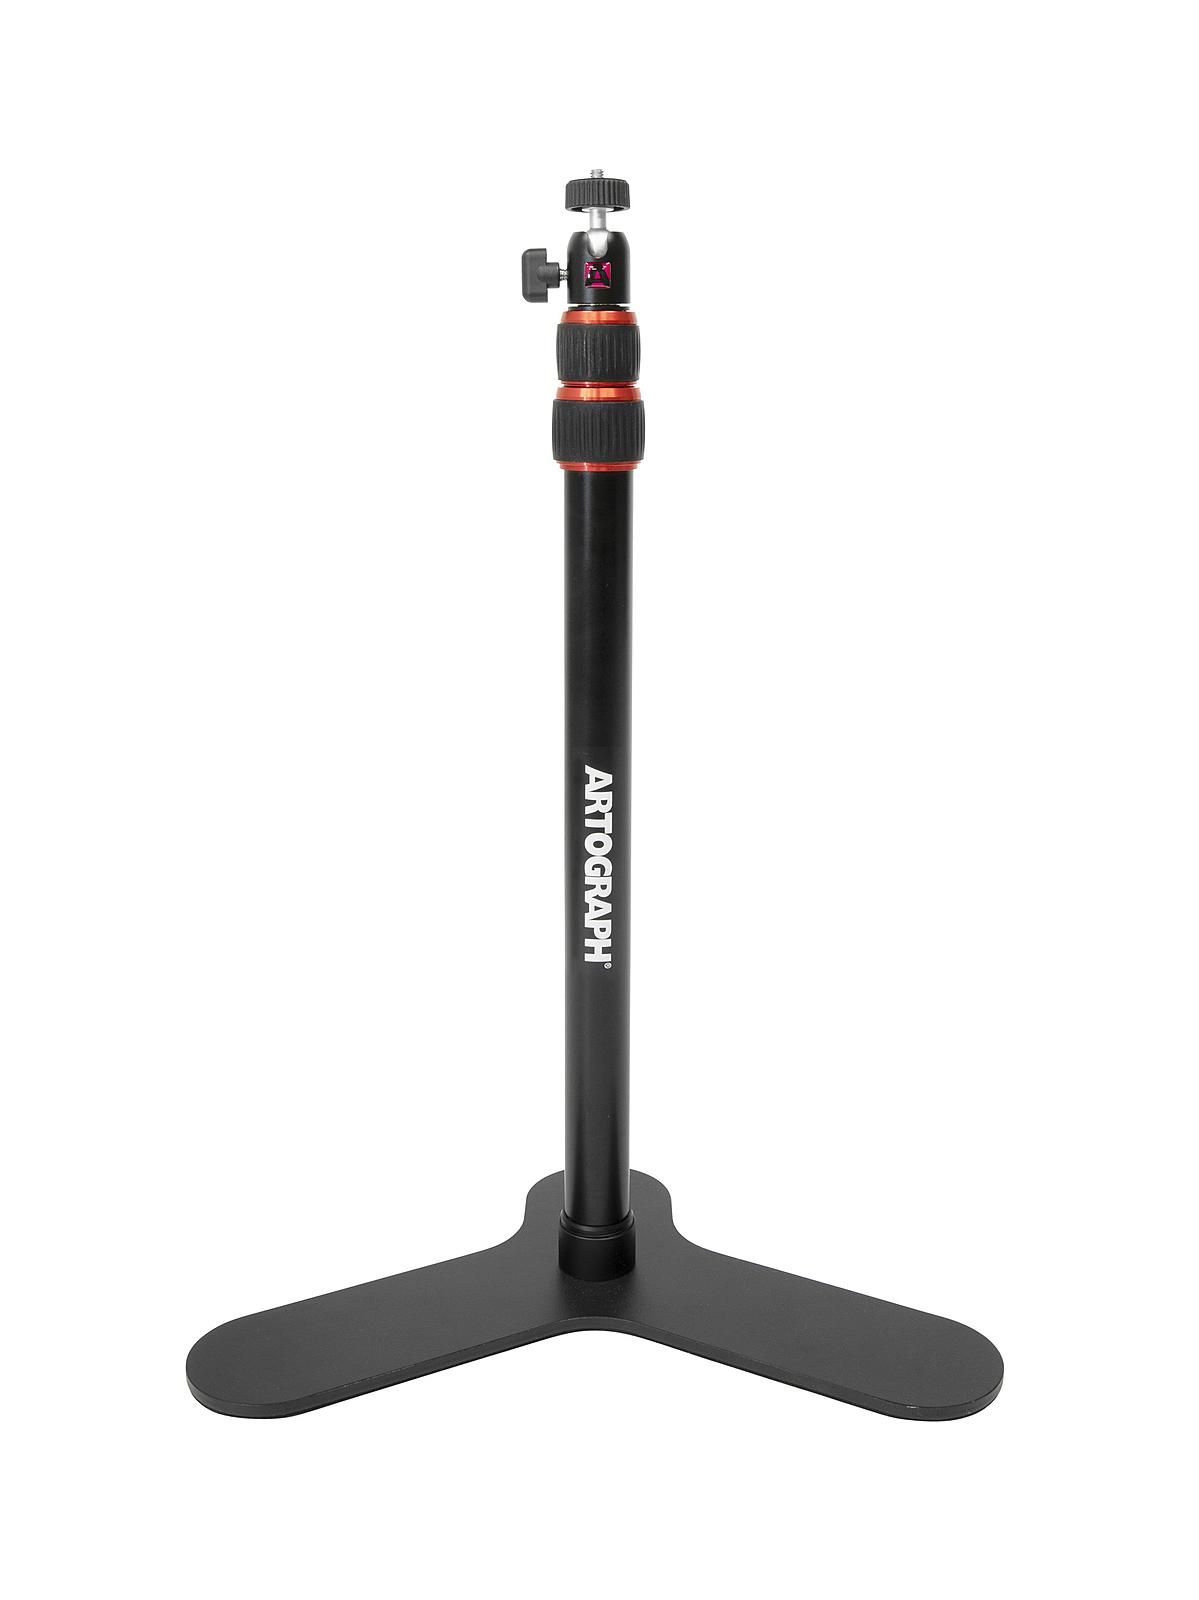 Artograph Digital Projector Table Stand